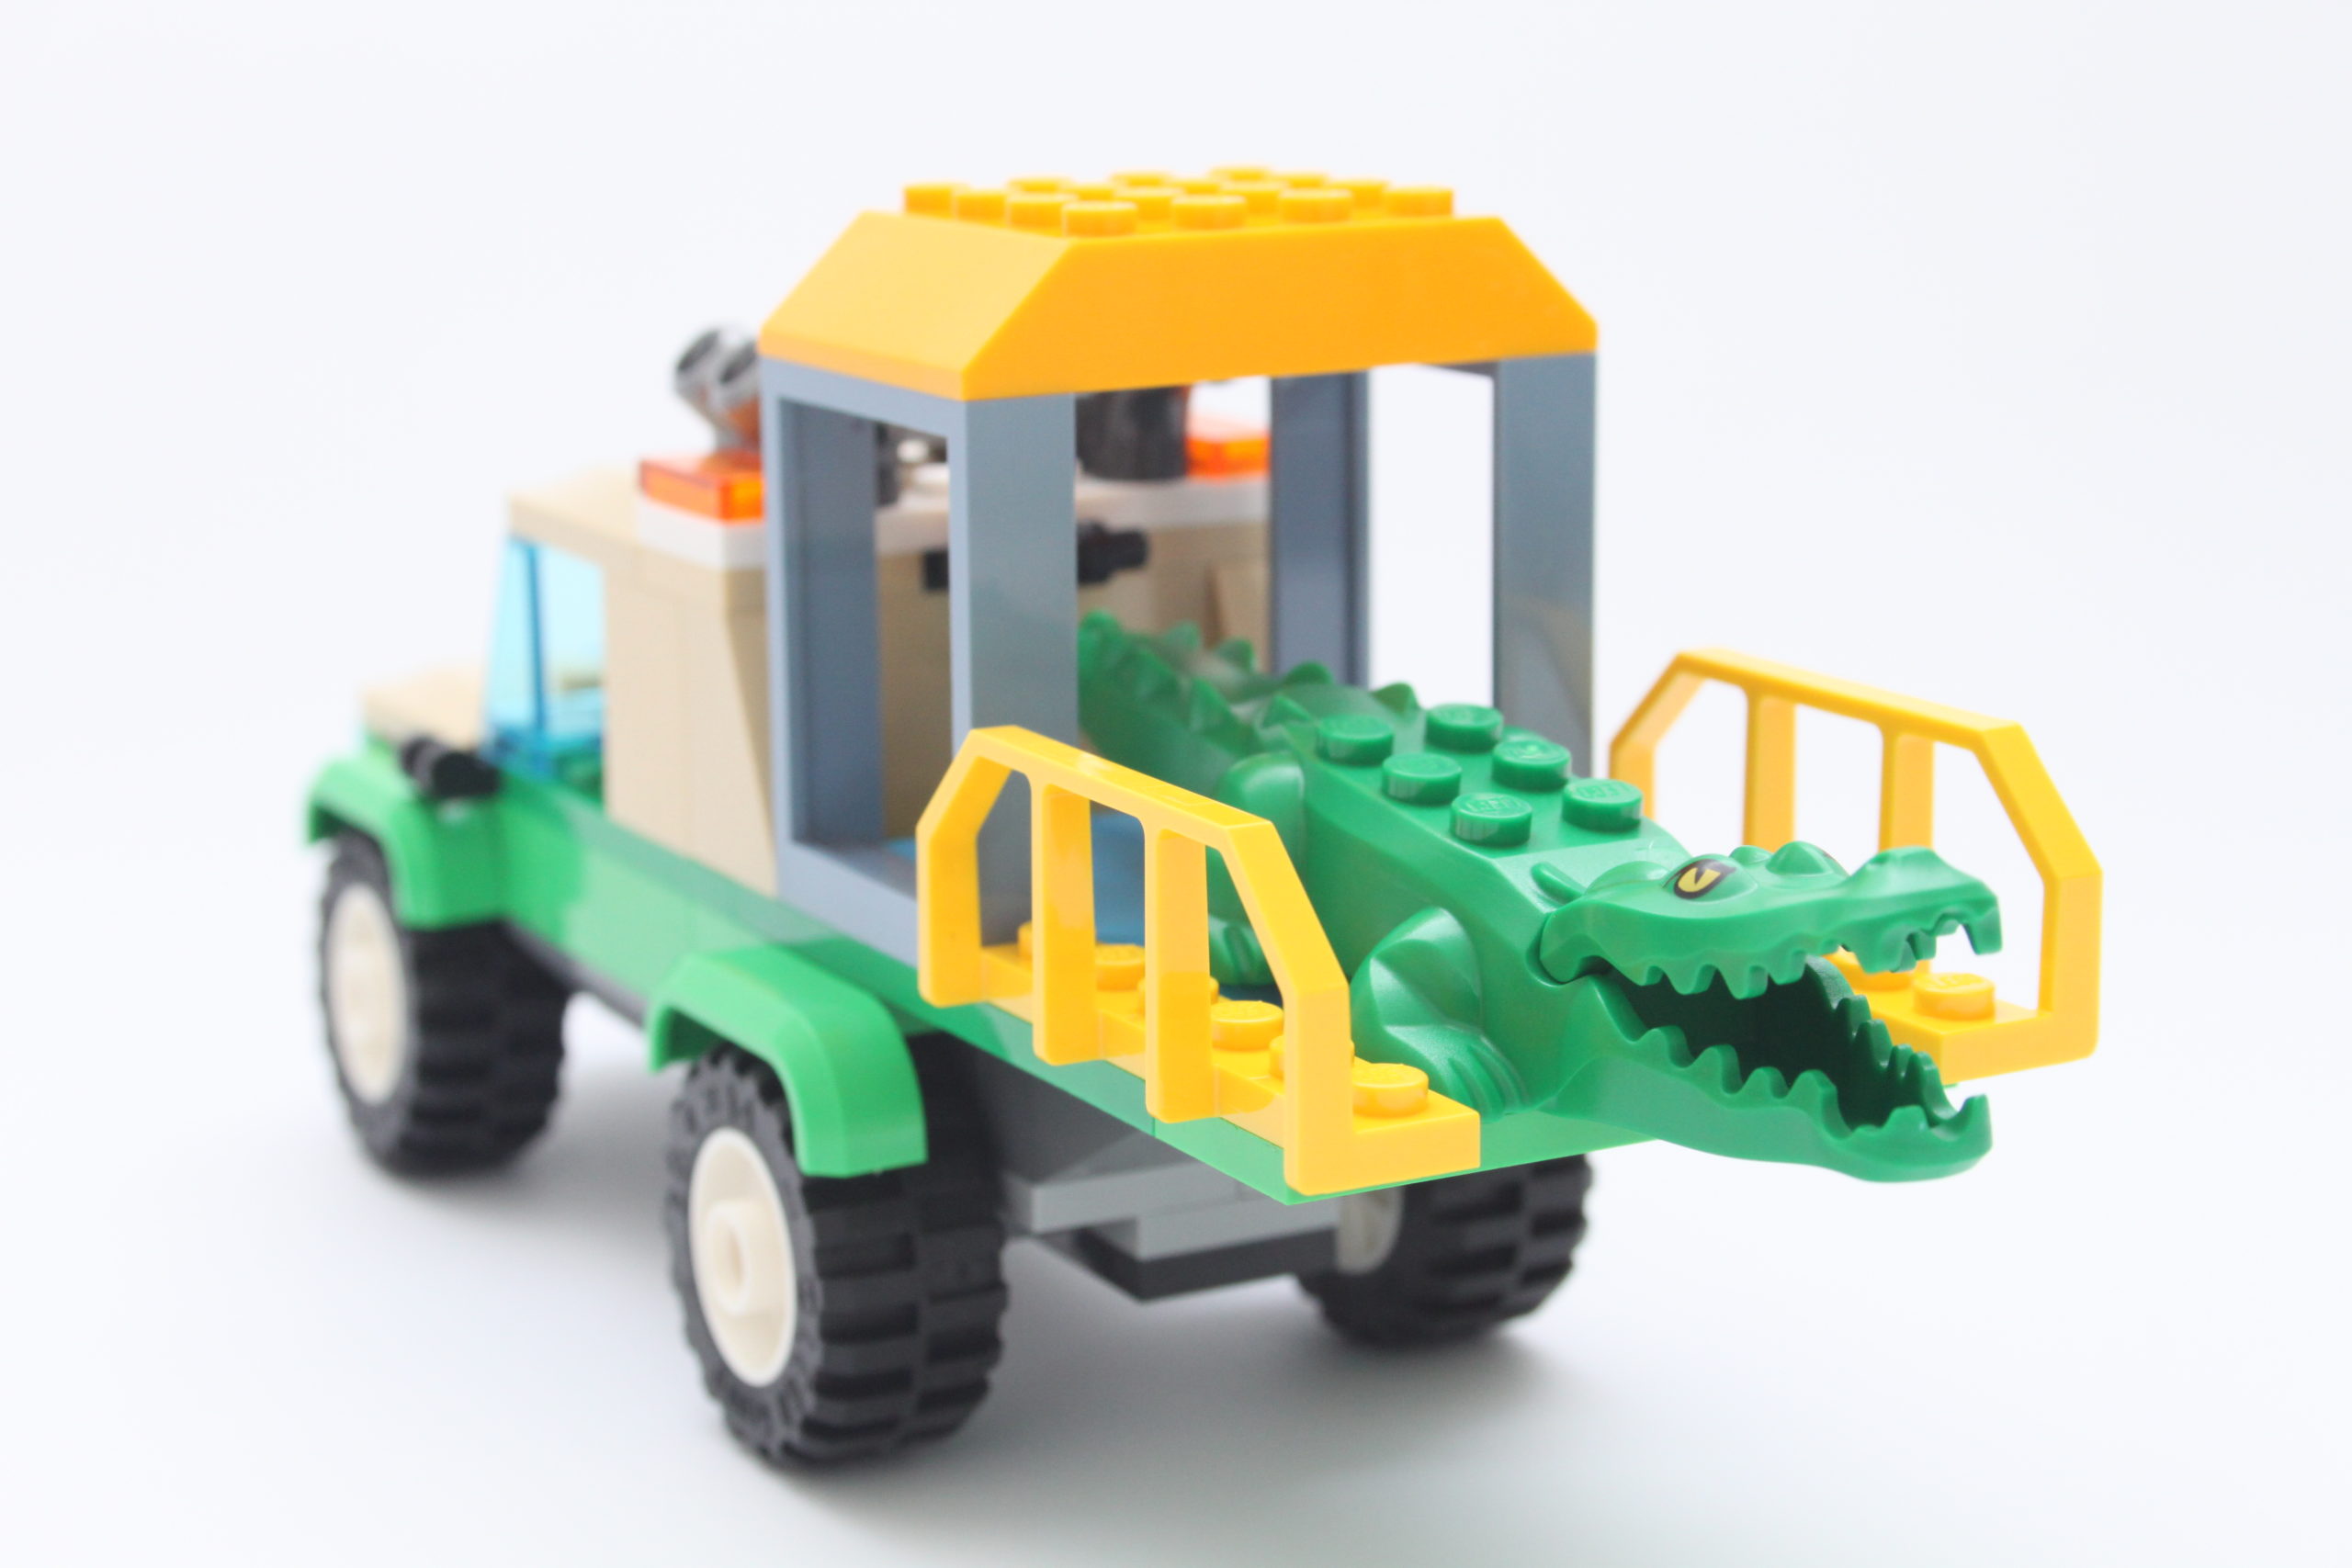 LEGO® City review: 60353 Wild Animal Rescue Missions